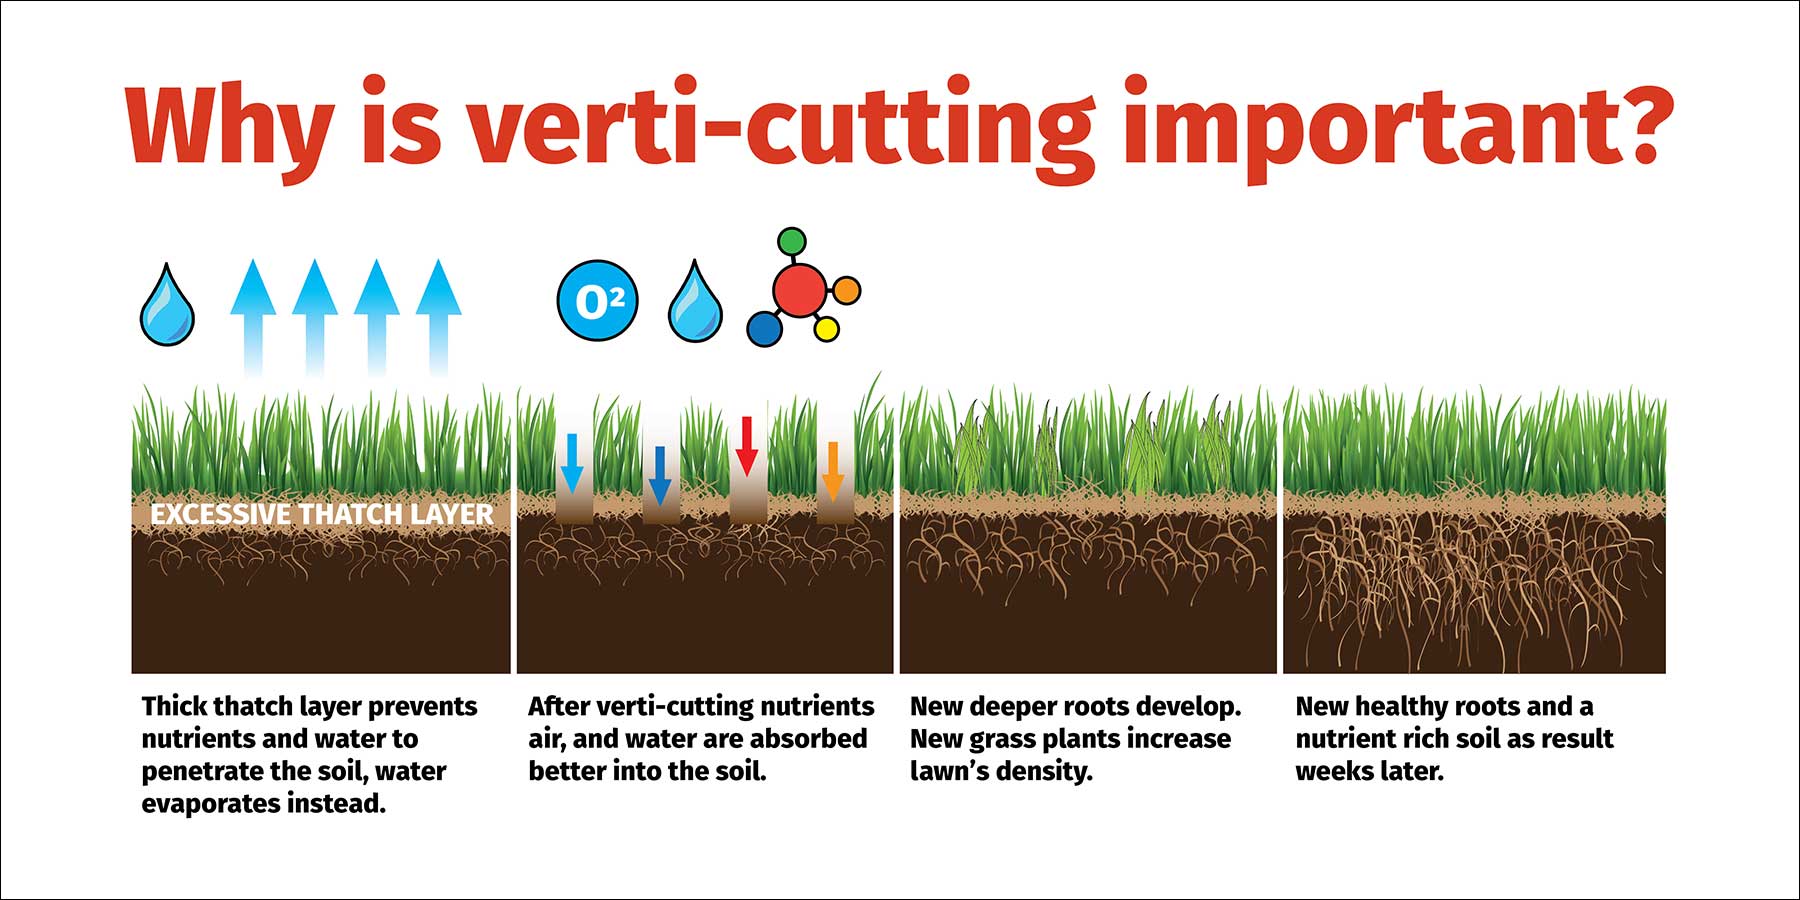 Why is verti-cutting important?